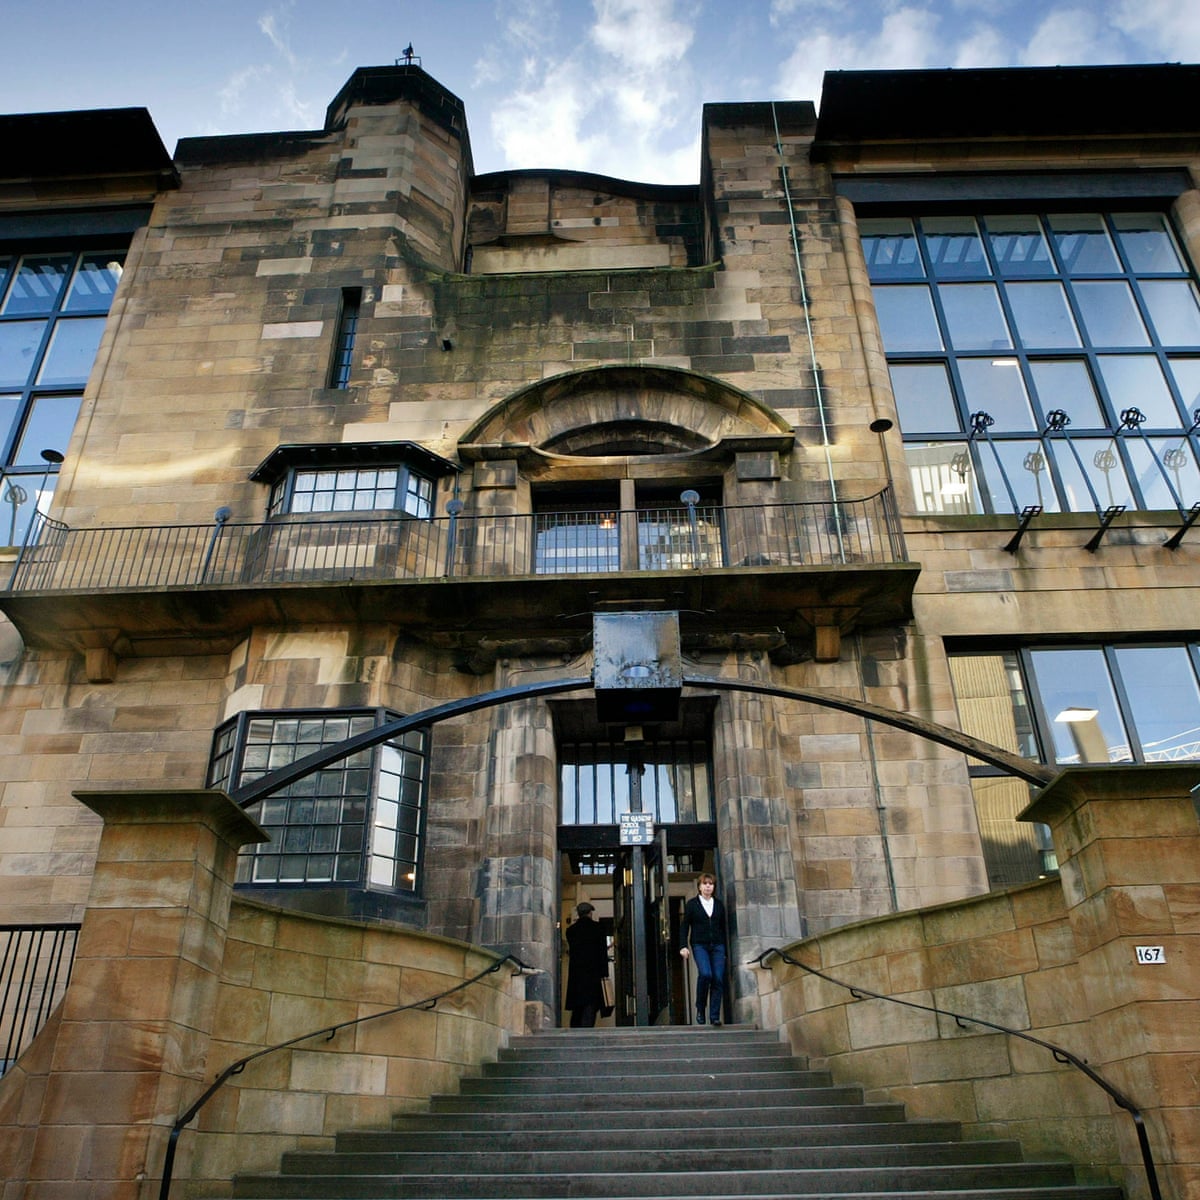 Bulldoze or rebuild? Architects at odds over future of Glasgow School of Art | Architecture | The Guardian